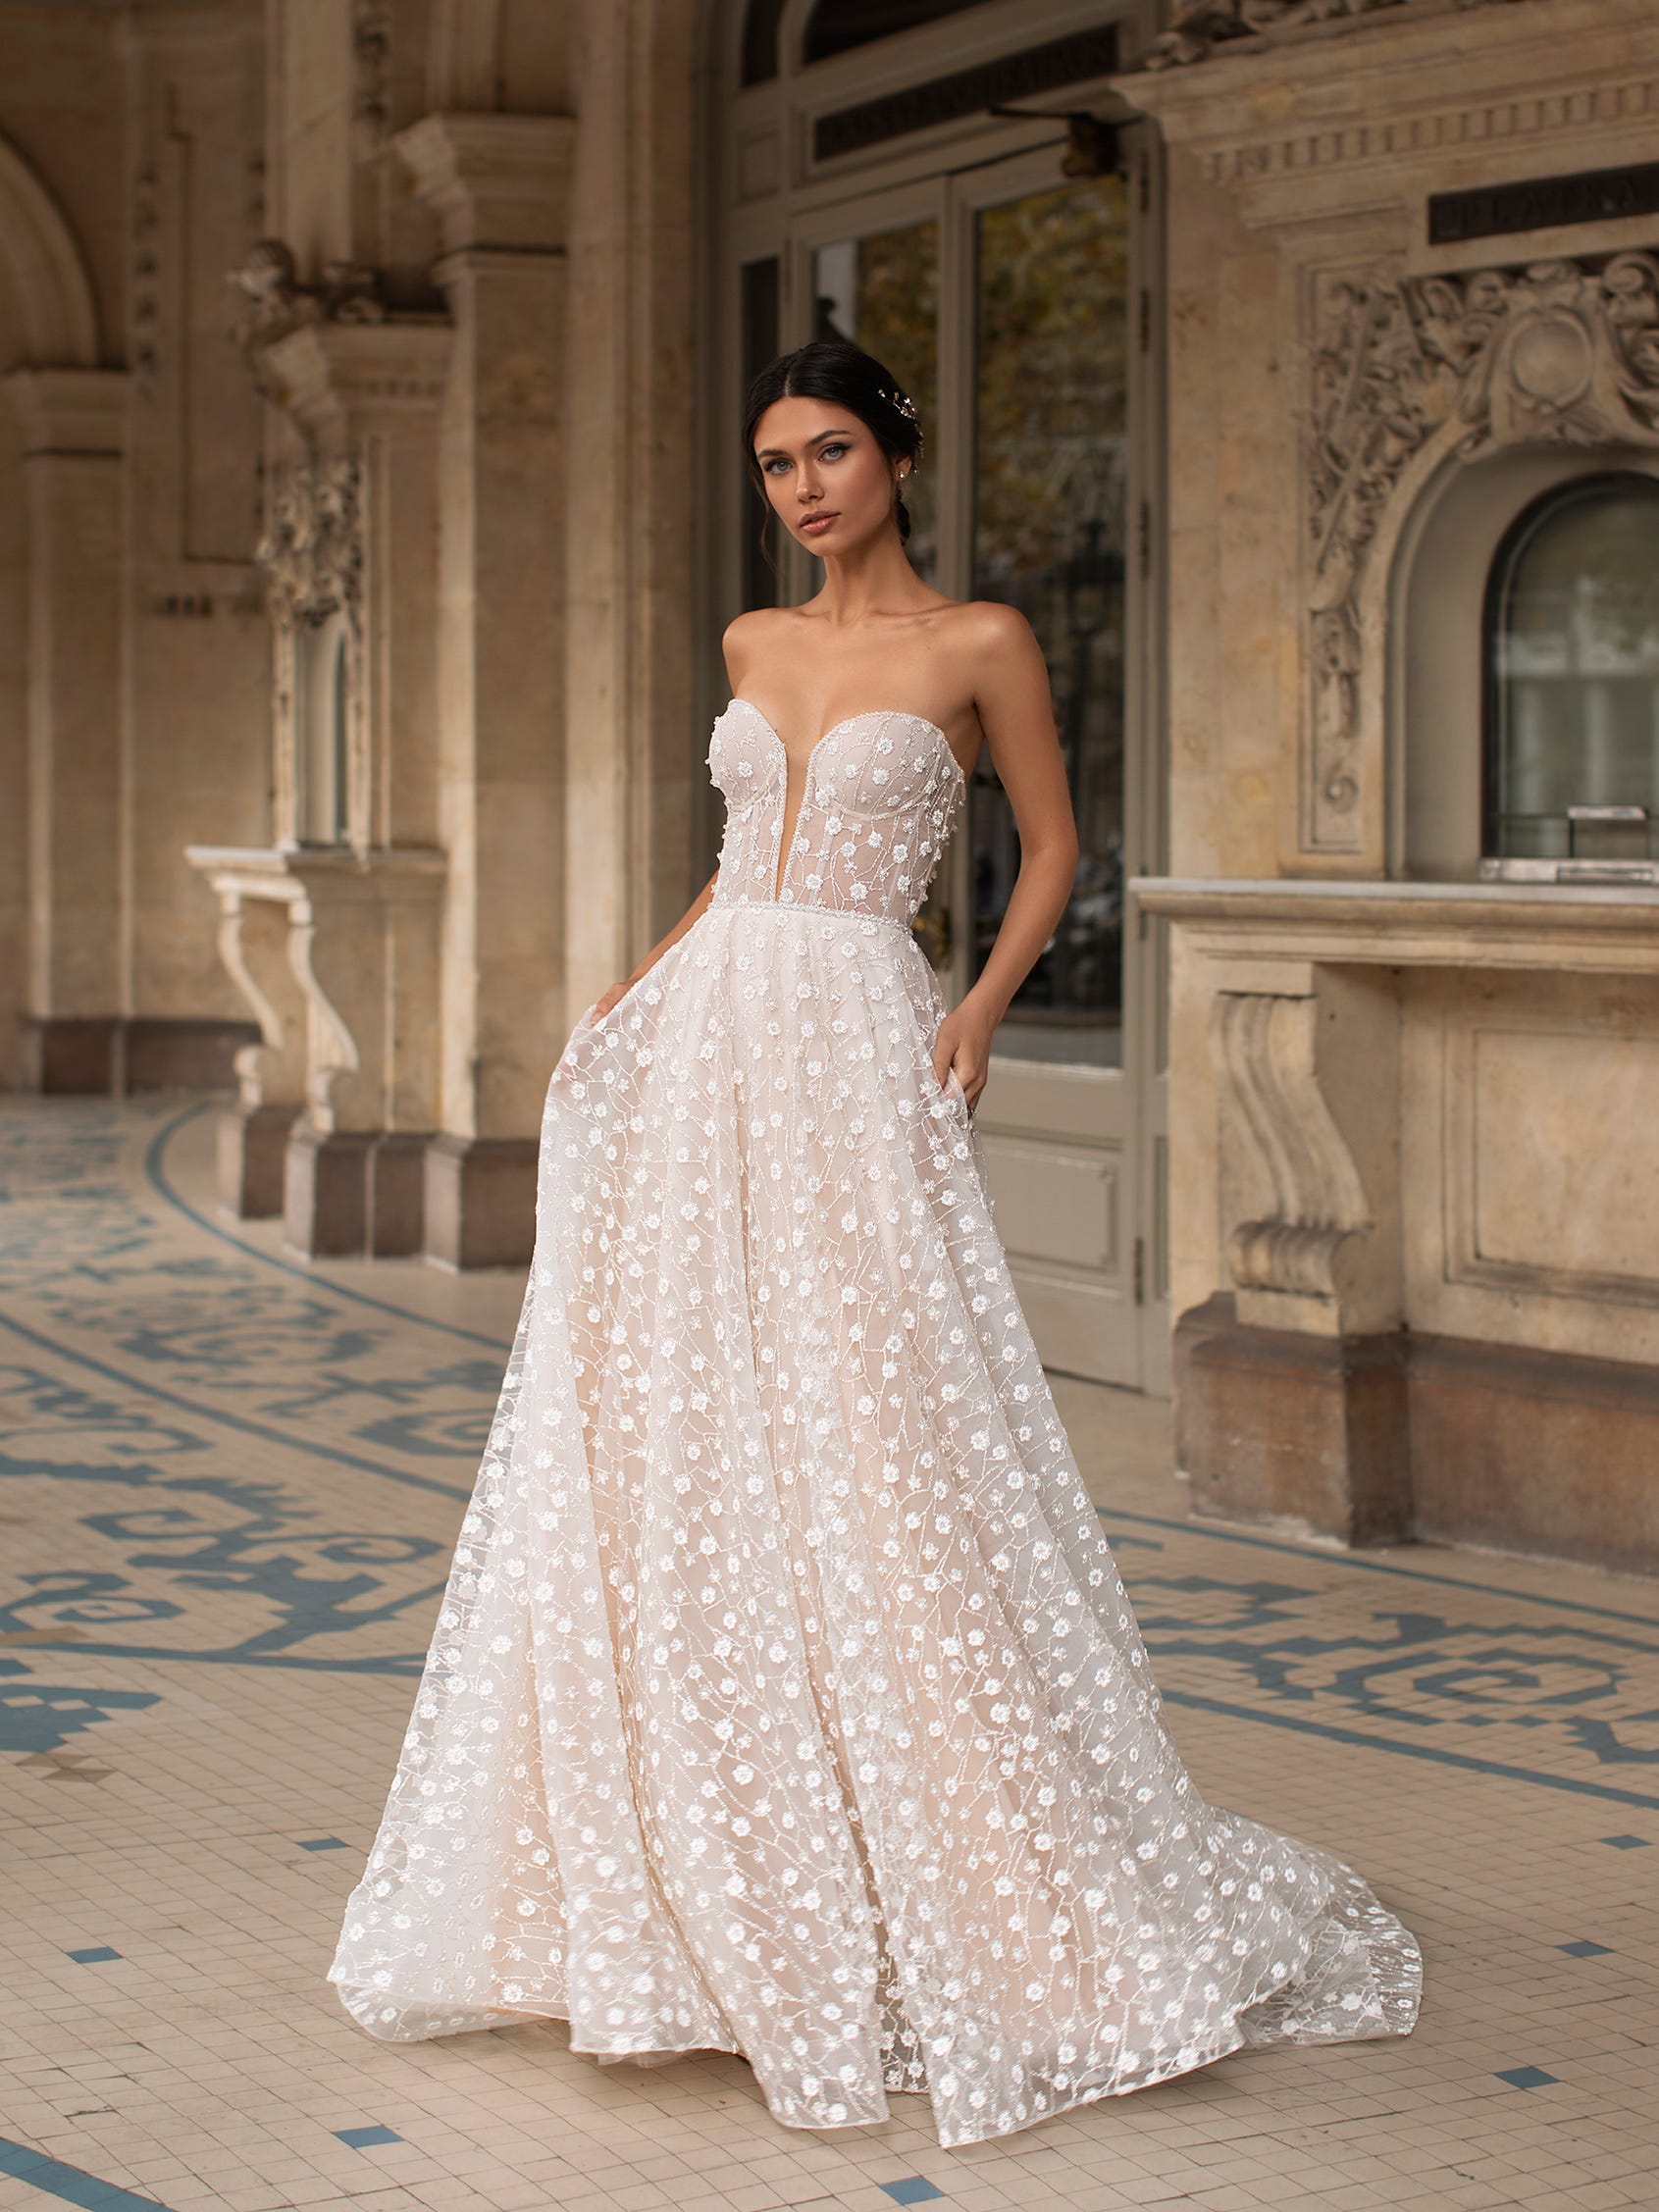 Small is Beautiful. Find the Perfect Dress For Your Intimate Civil Ceremony